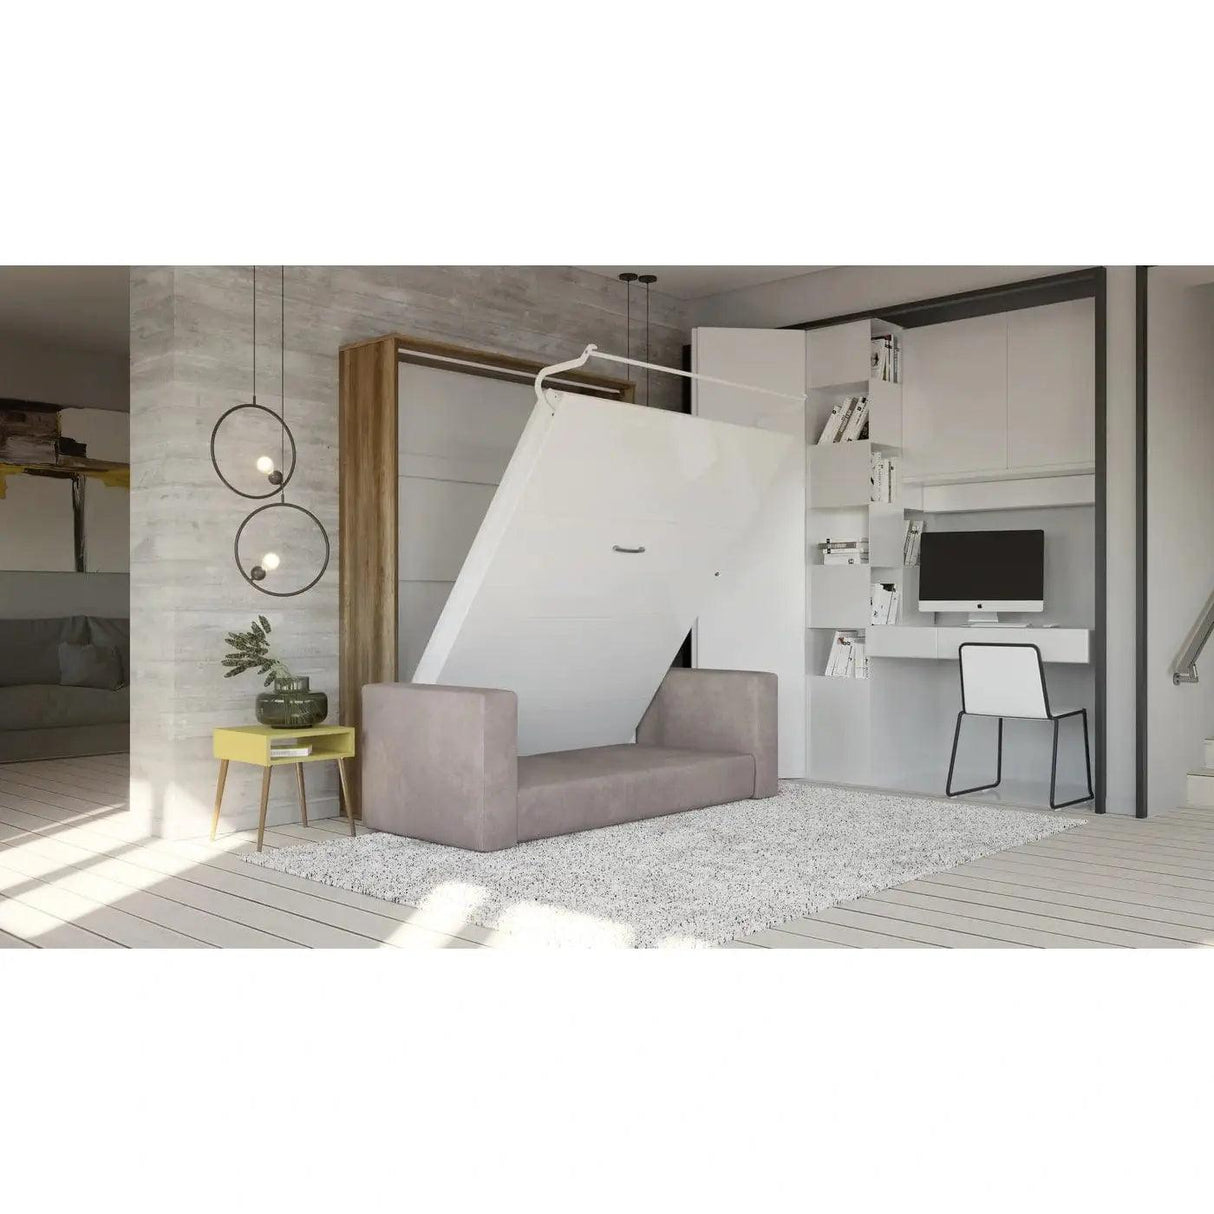 Maxima House Murphy bed European Full XL Vertical with Sofa Invento. SALE IN001OW-B - Bedroom Depot USA